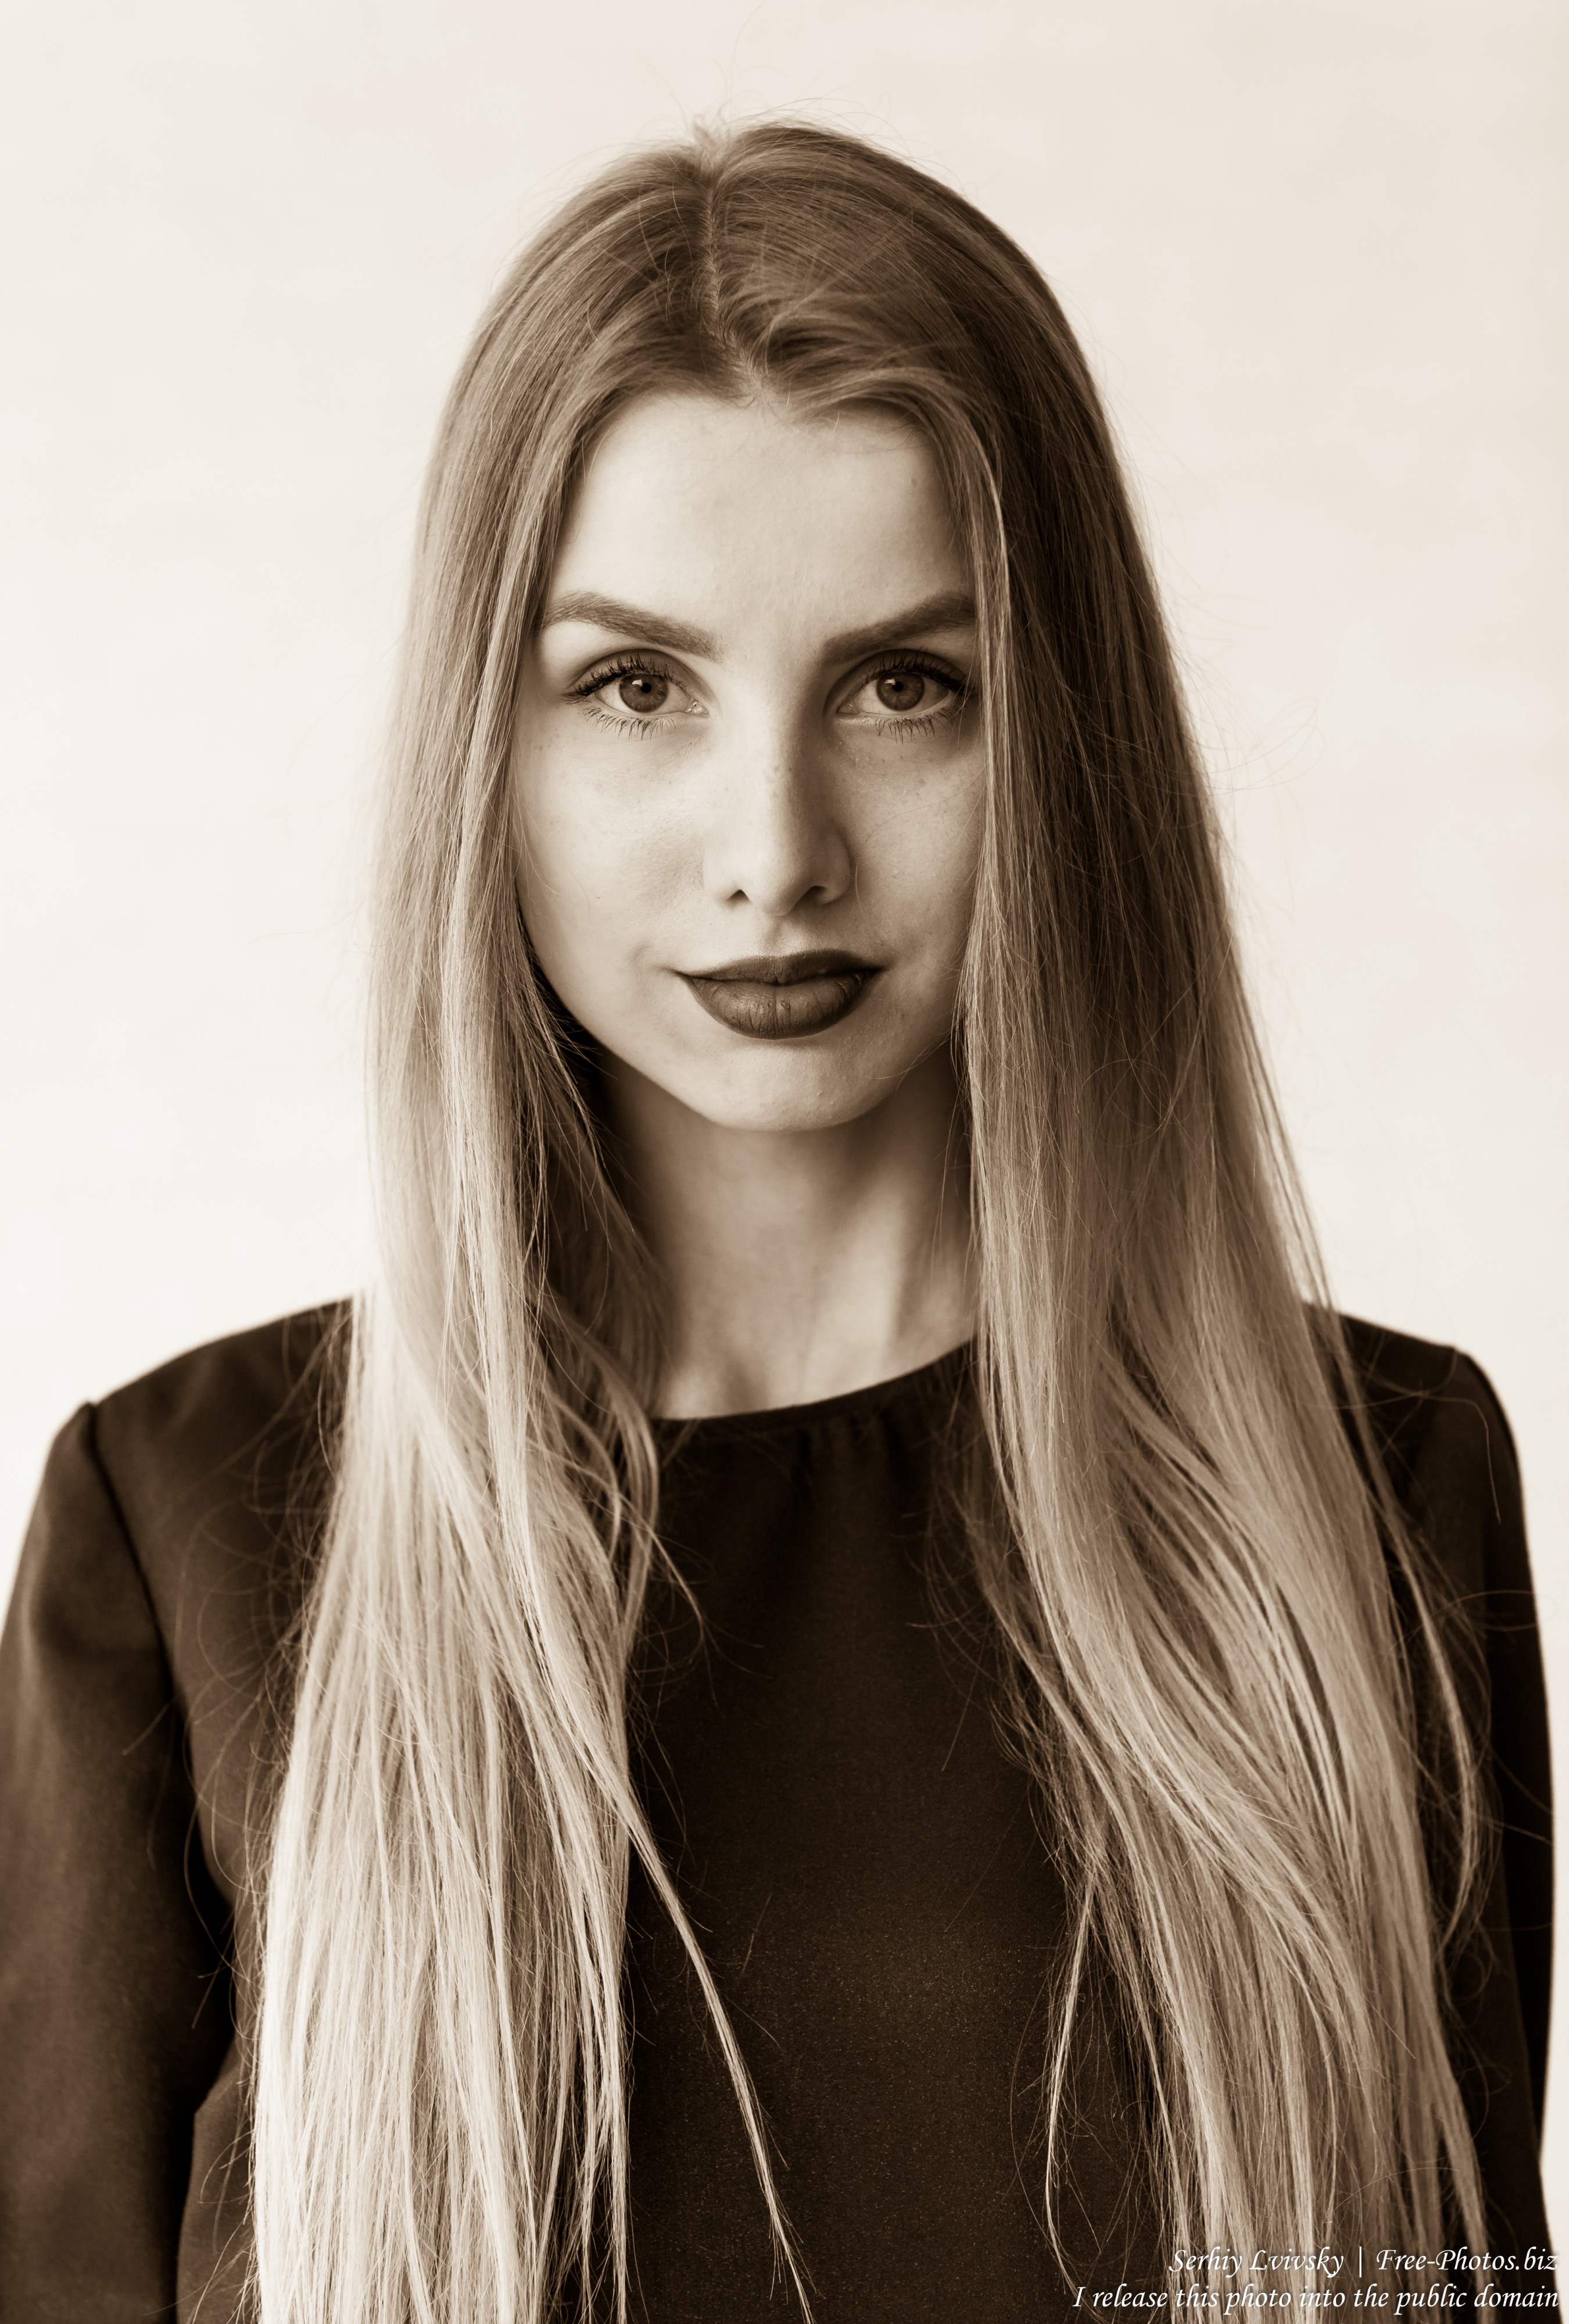 Lila - a 21-year-old natural blond girl photographed in May 2017 by Serhiy Lvivsky, picture 18